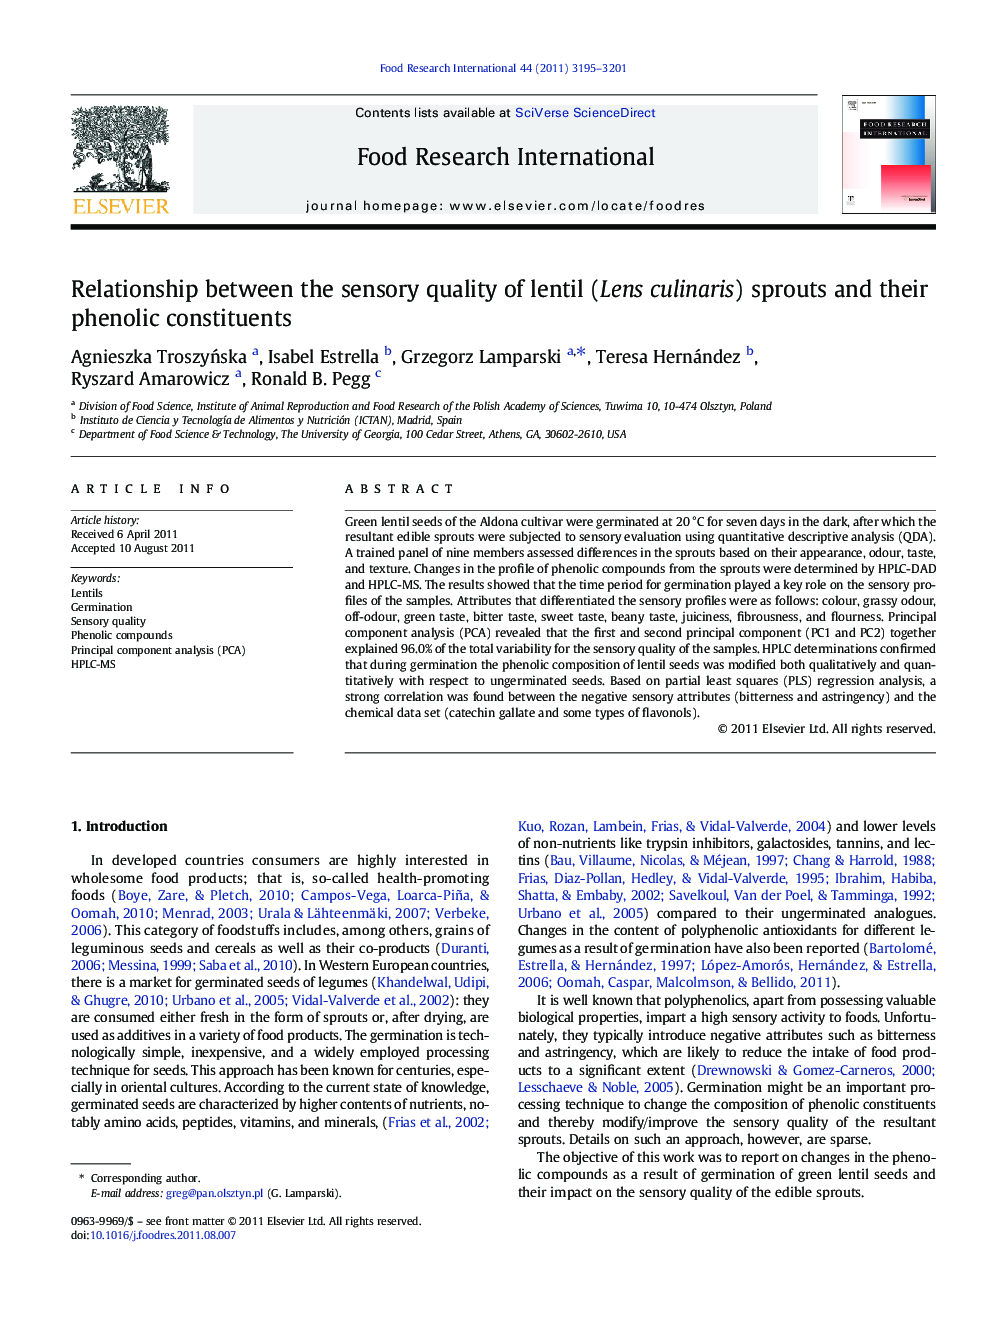 Relationship between the sensory quality of lentil (Lens culinaris) sprouts and their phenolic constituents